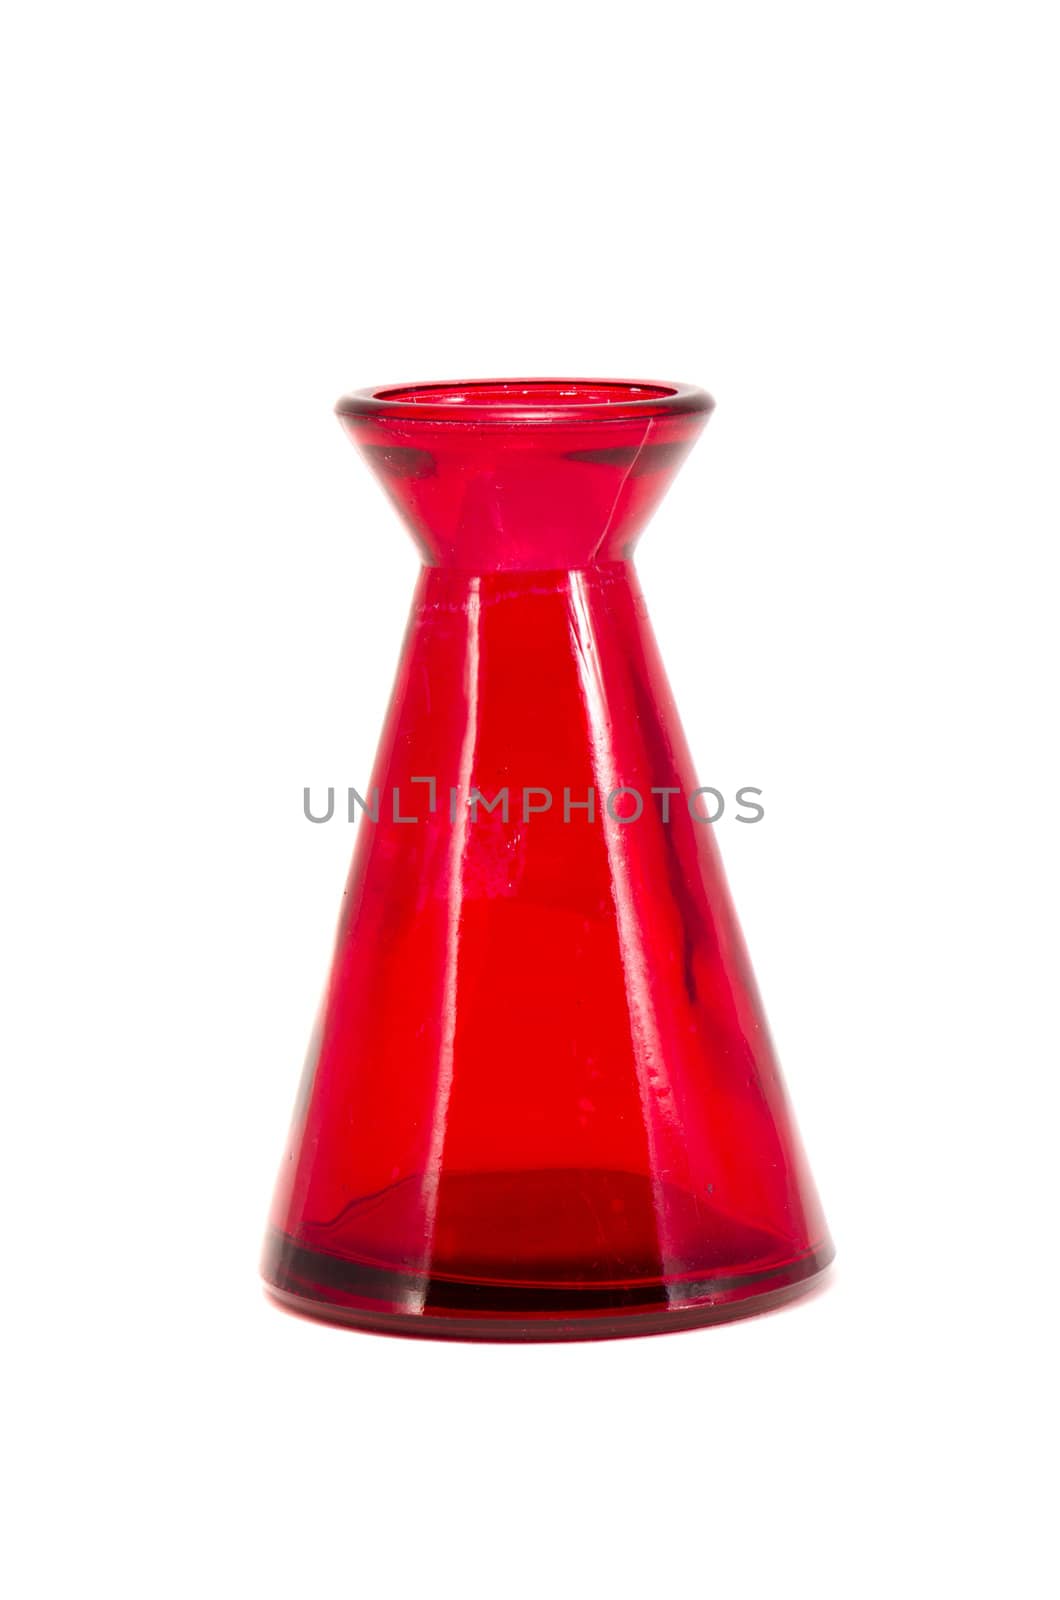 isolated red glass vase by alis_photo